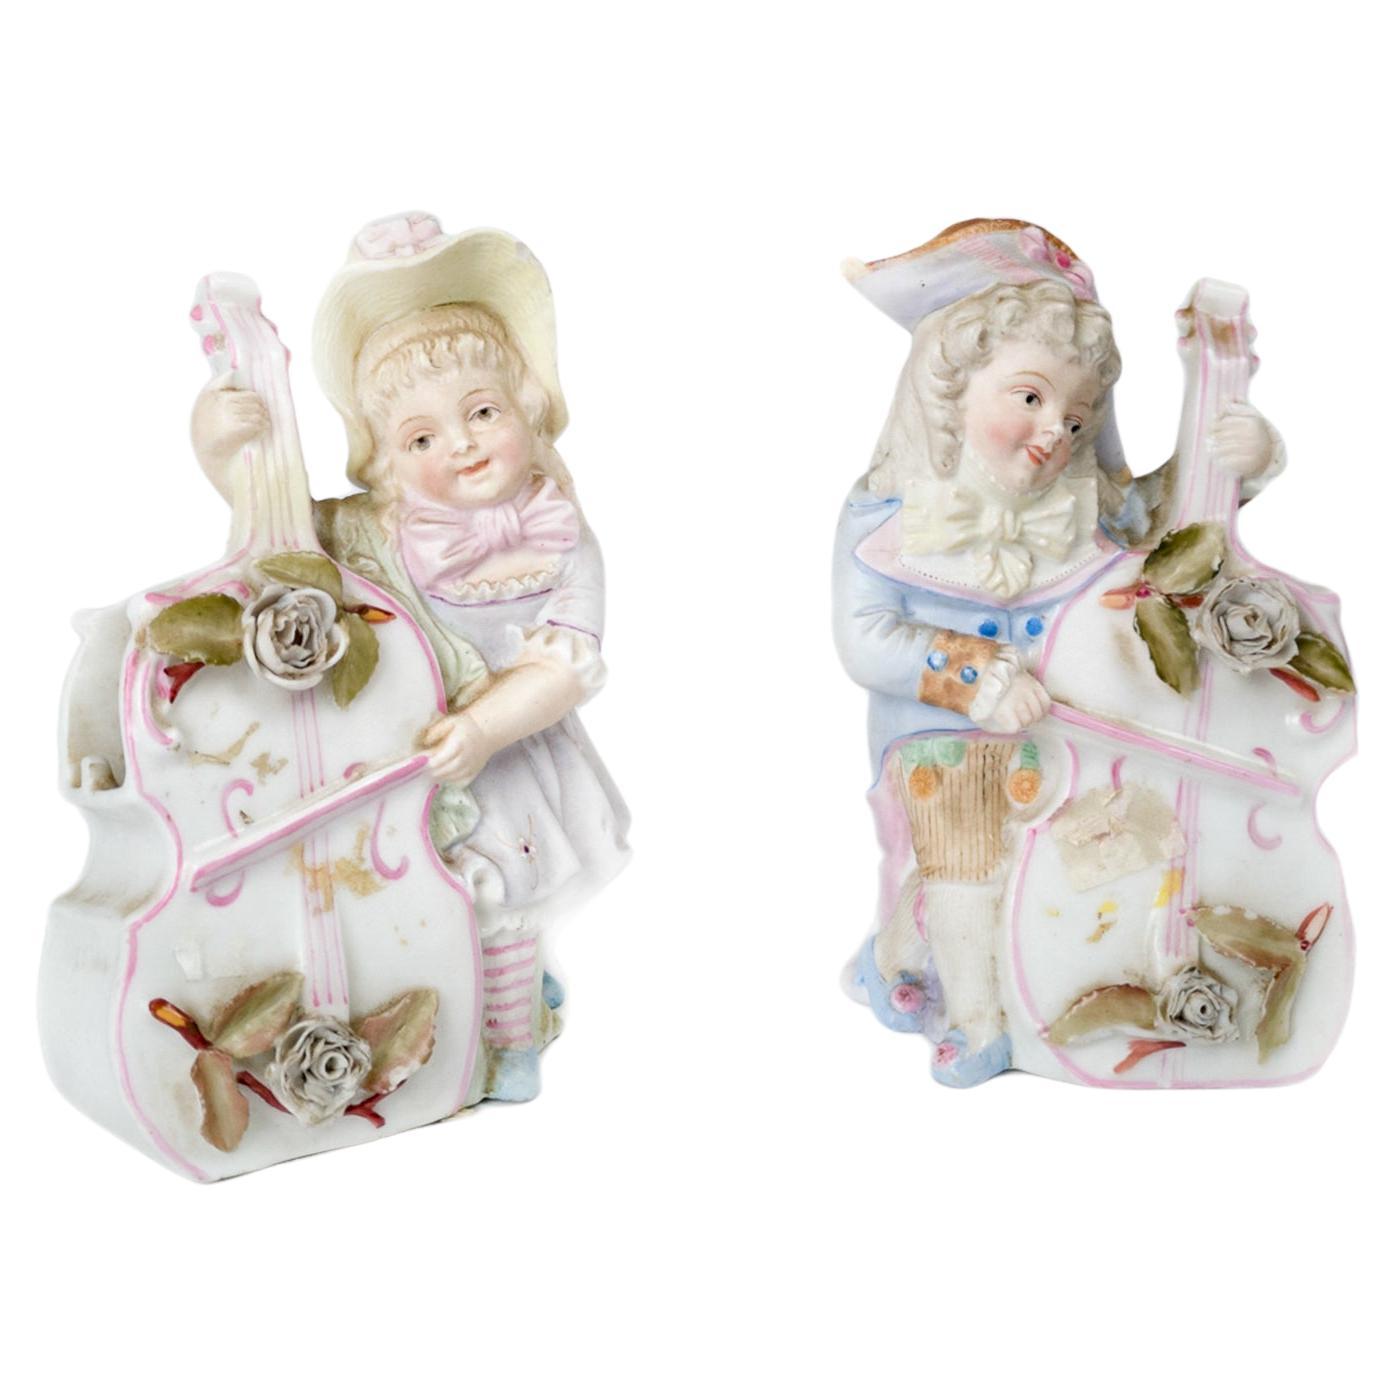 Musicians Porcelain Figures Vases by Heubach Brothers, Early 20th Century For Sale